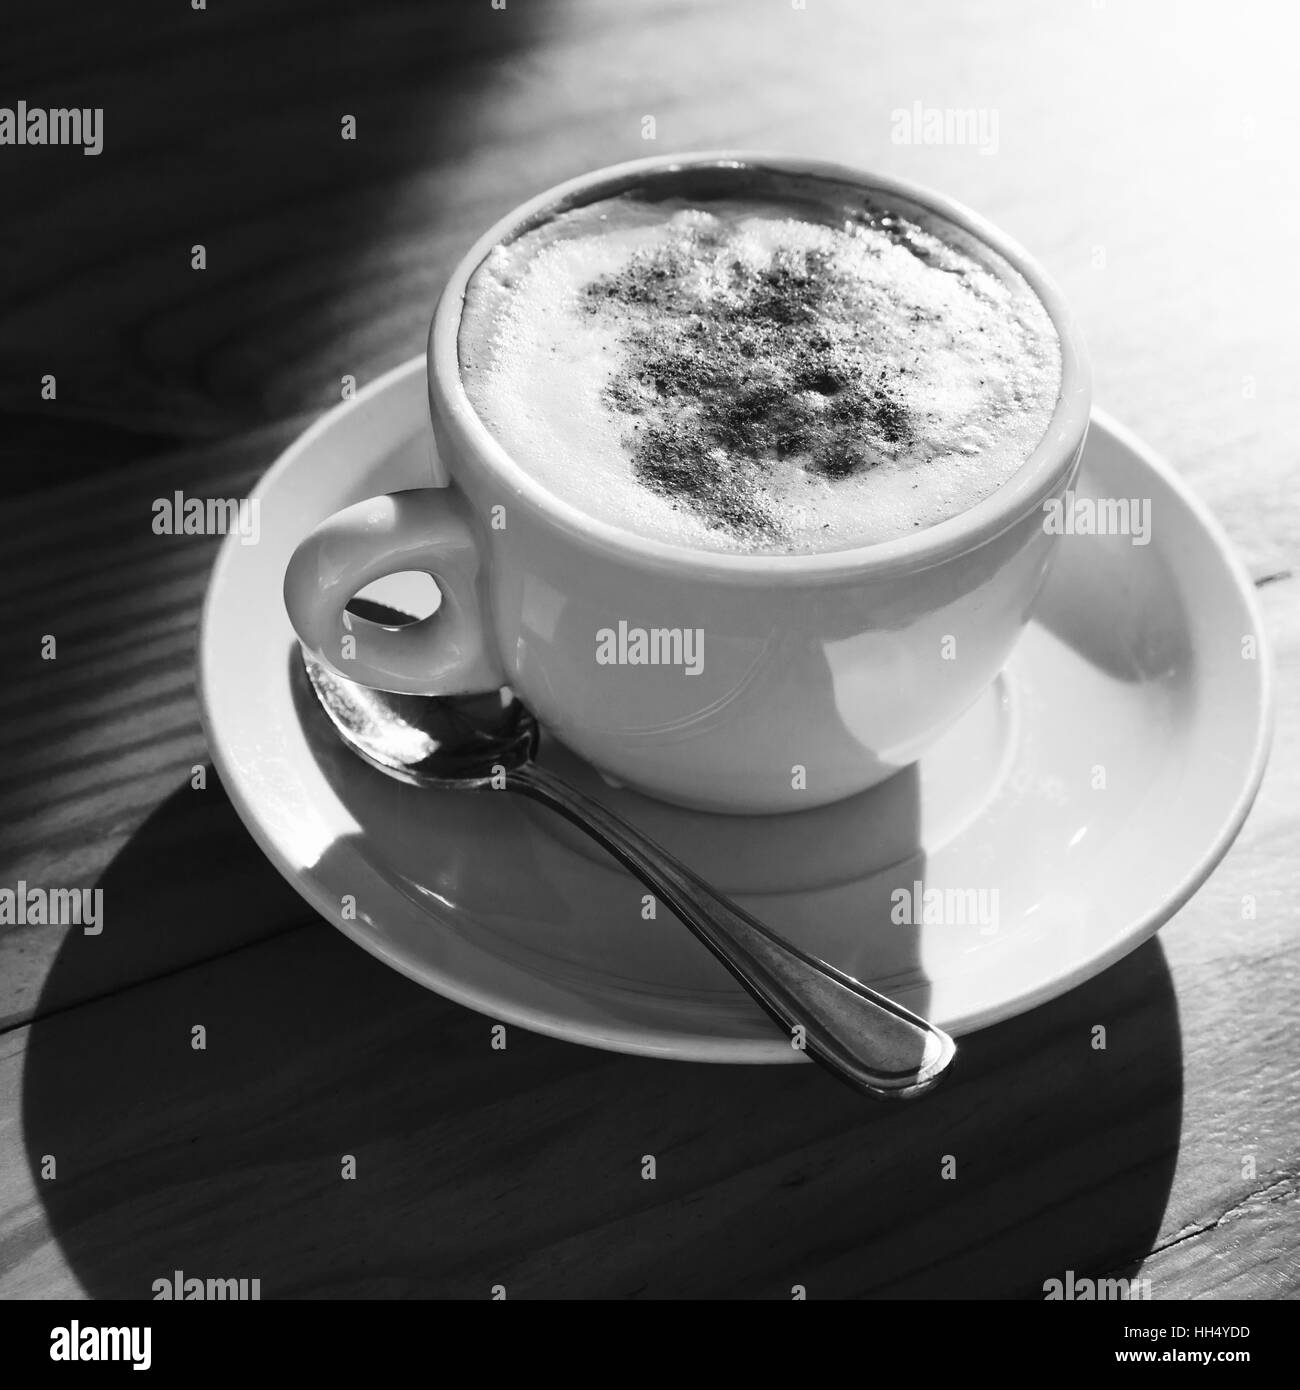 Cappuccino. Cup of coffee with milk foam and cinnamon powder stands on wooden table, square black and white photo Stock Photo